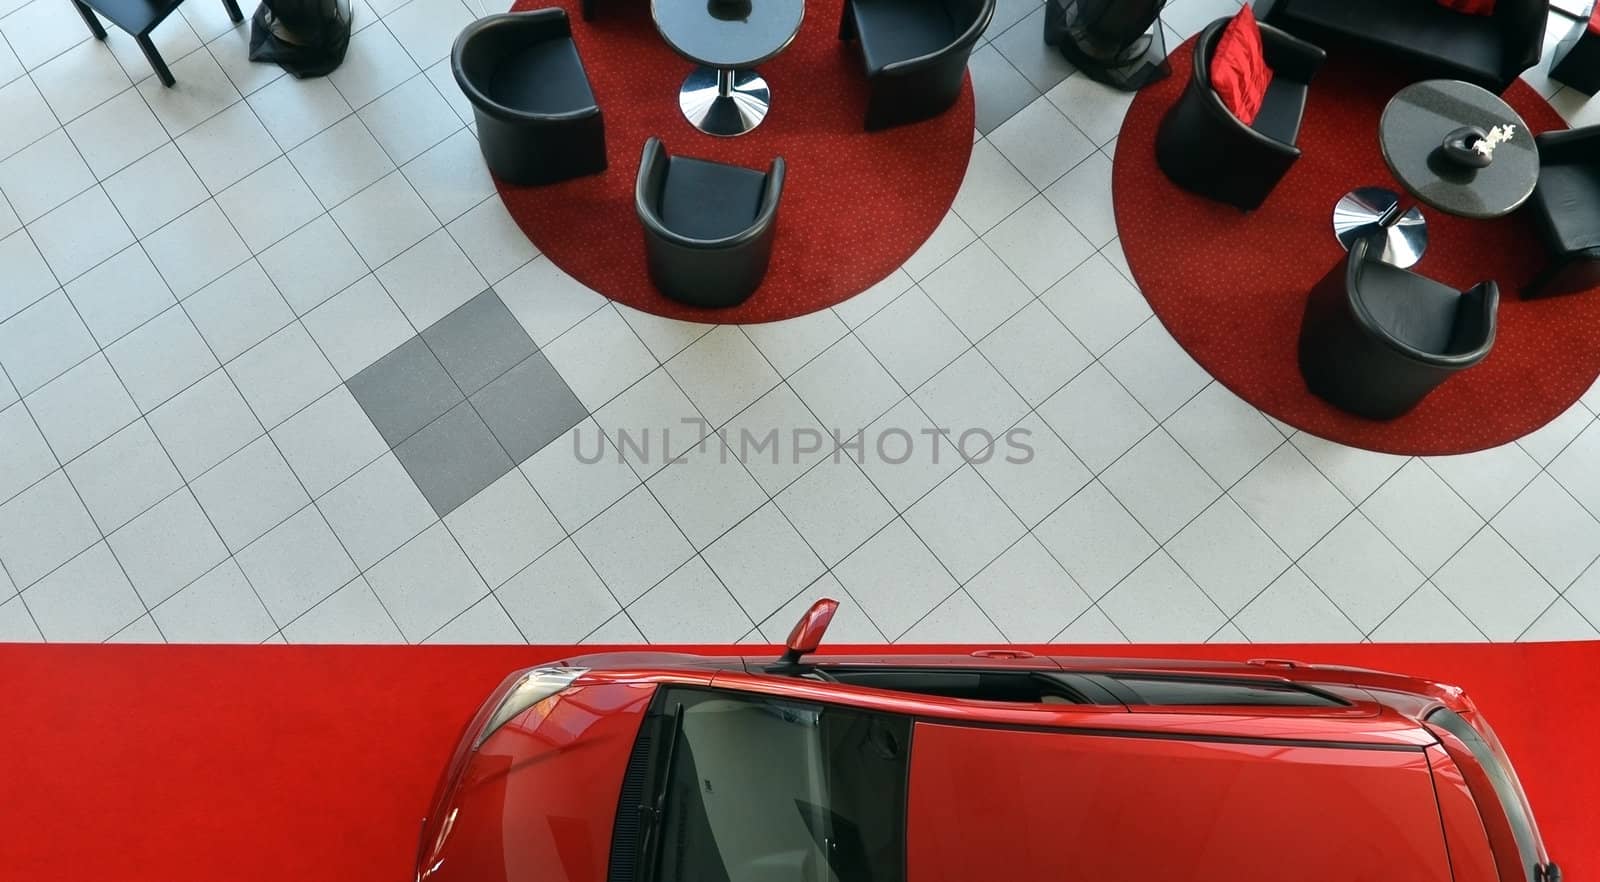 Interior of a car shop with tables and chairs for customers. View from top. Small car standing on red carpet.